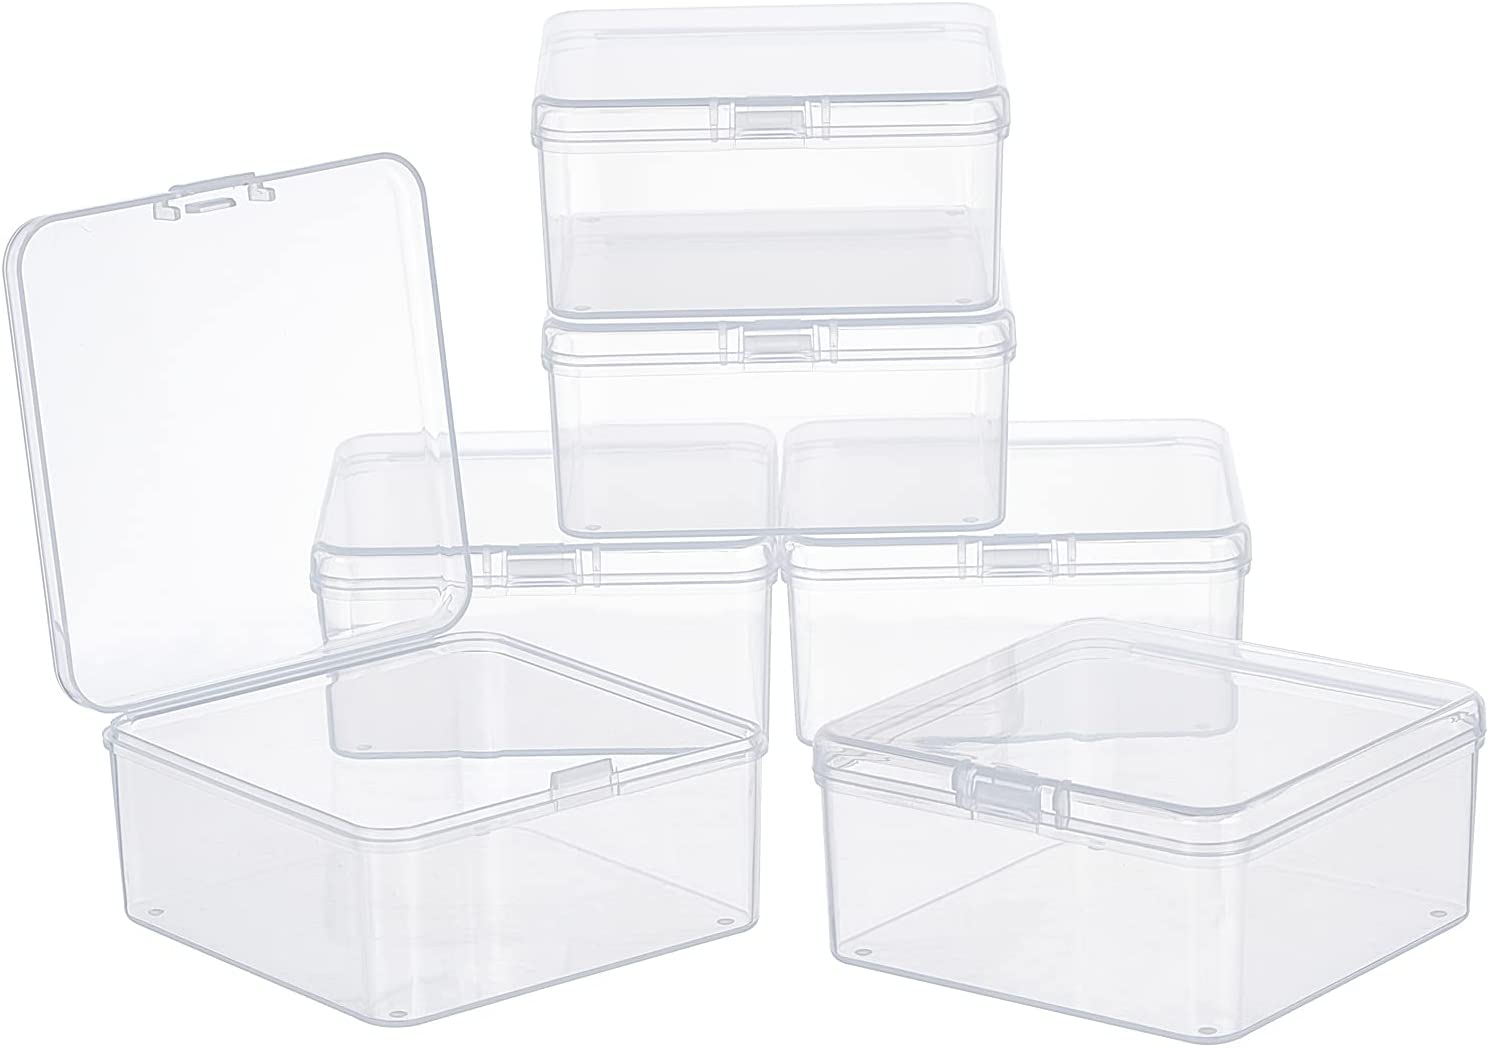 SUPERFINDINGS 6 Pack Clear Plastic Beads Storage Containers Boxes with Lids  Small Sqaure Plastic Organizer Storage Cases for Beads, Jewelry, Office  Supplies, Craft Supplies, 3x3x1.4in 